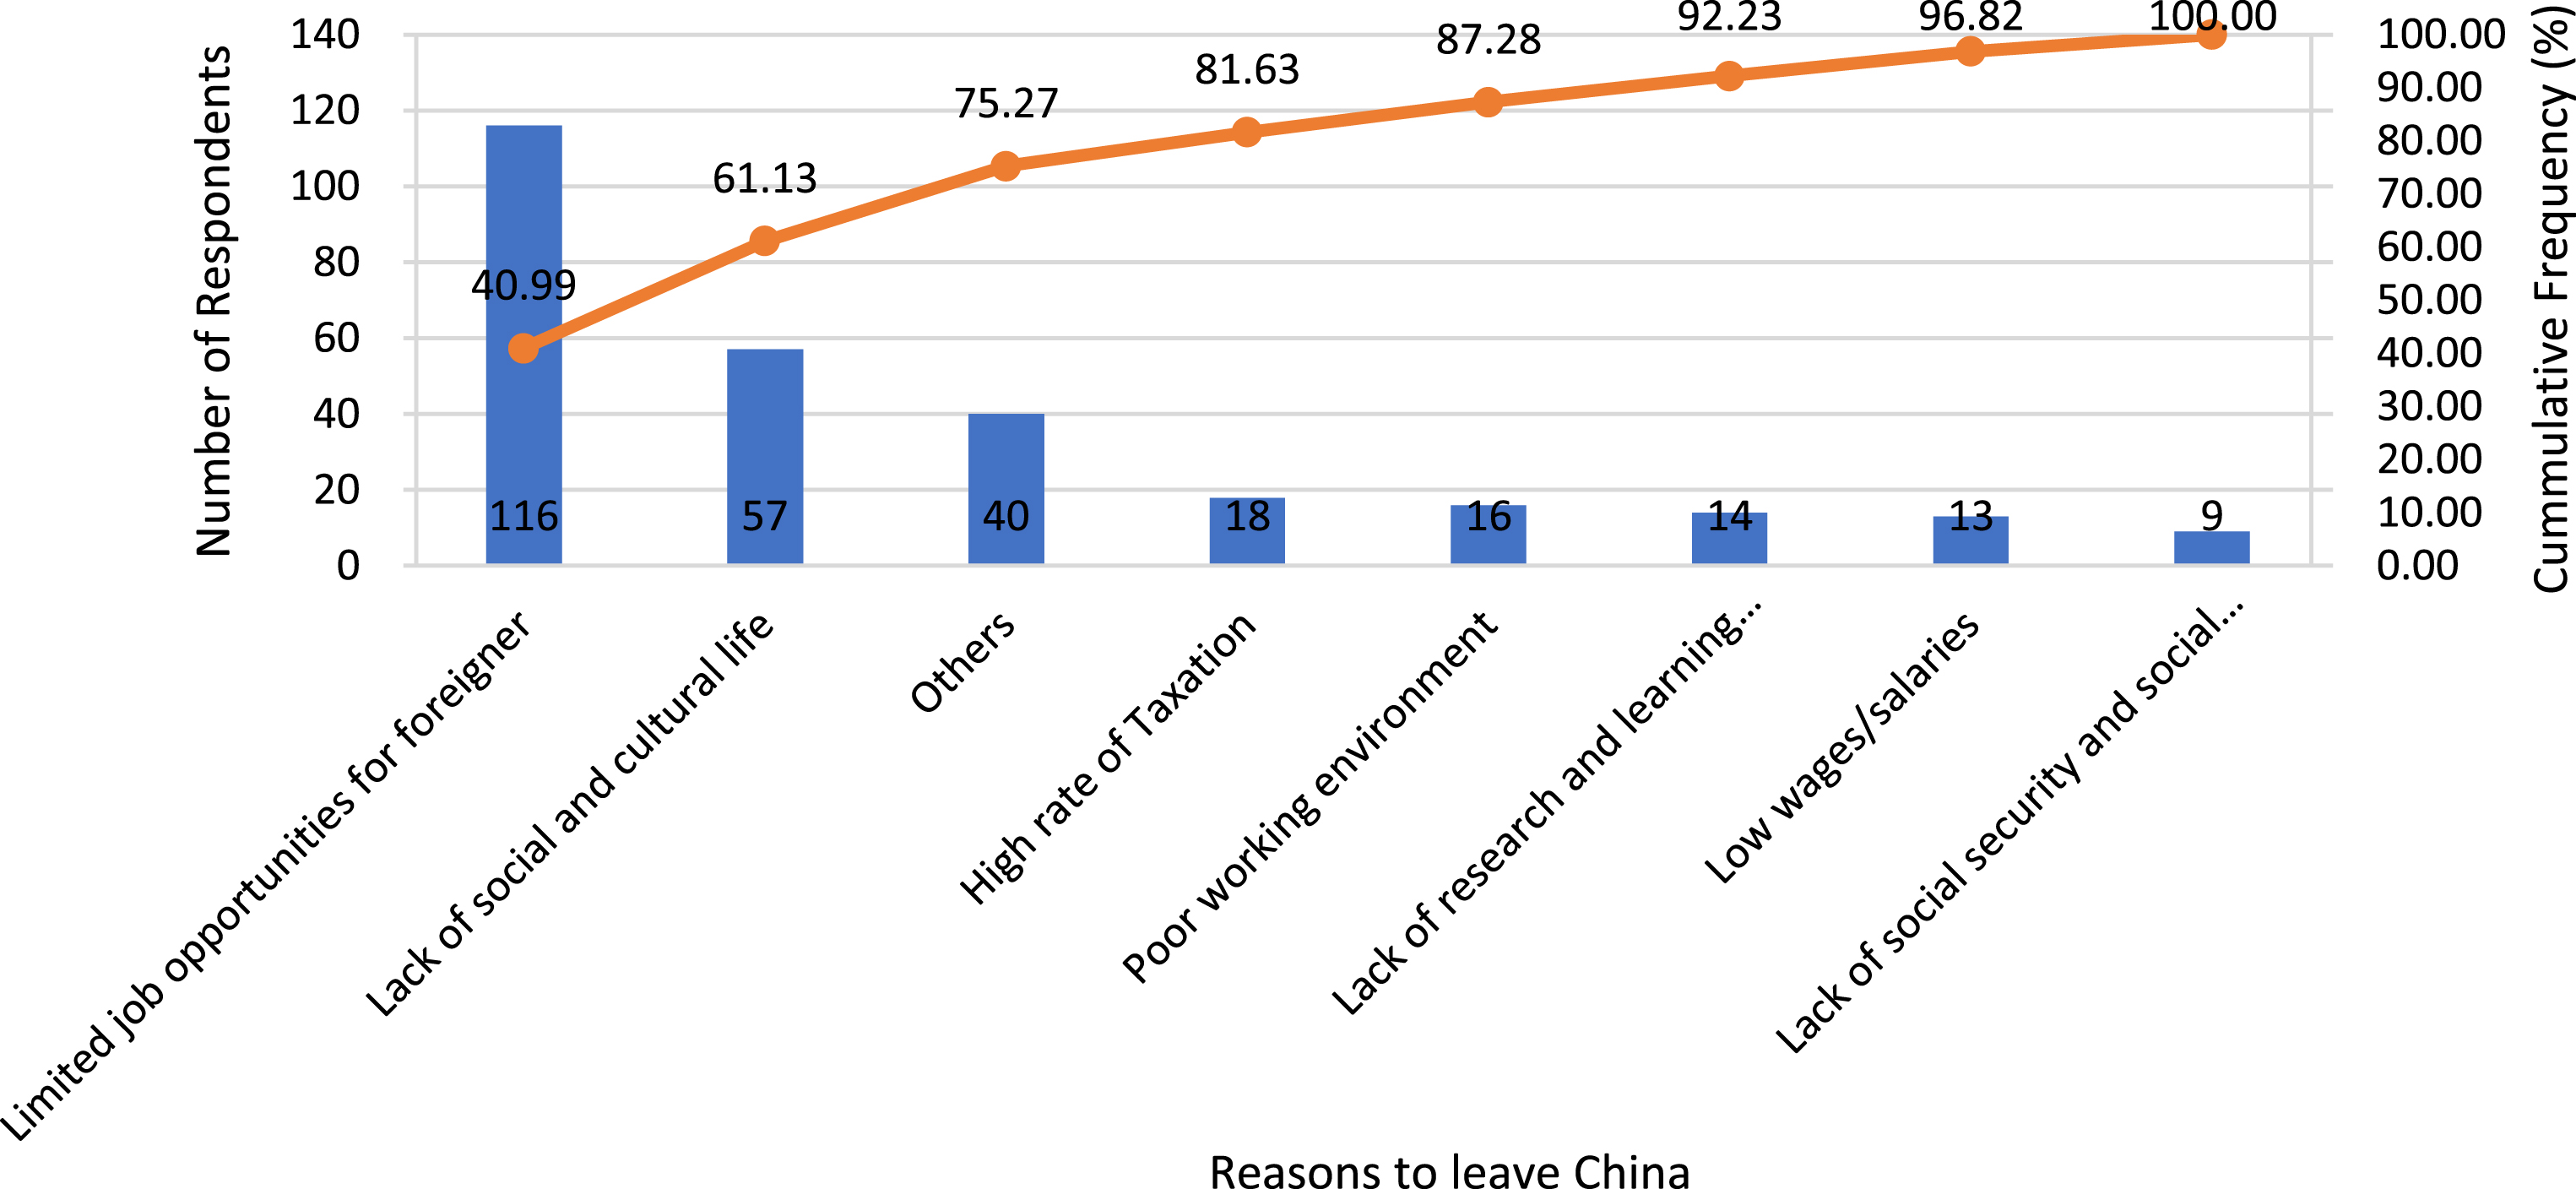 Should I stay or should I go? Foreign-student intent in China - IOS Press